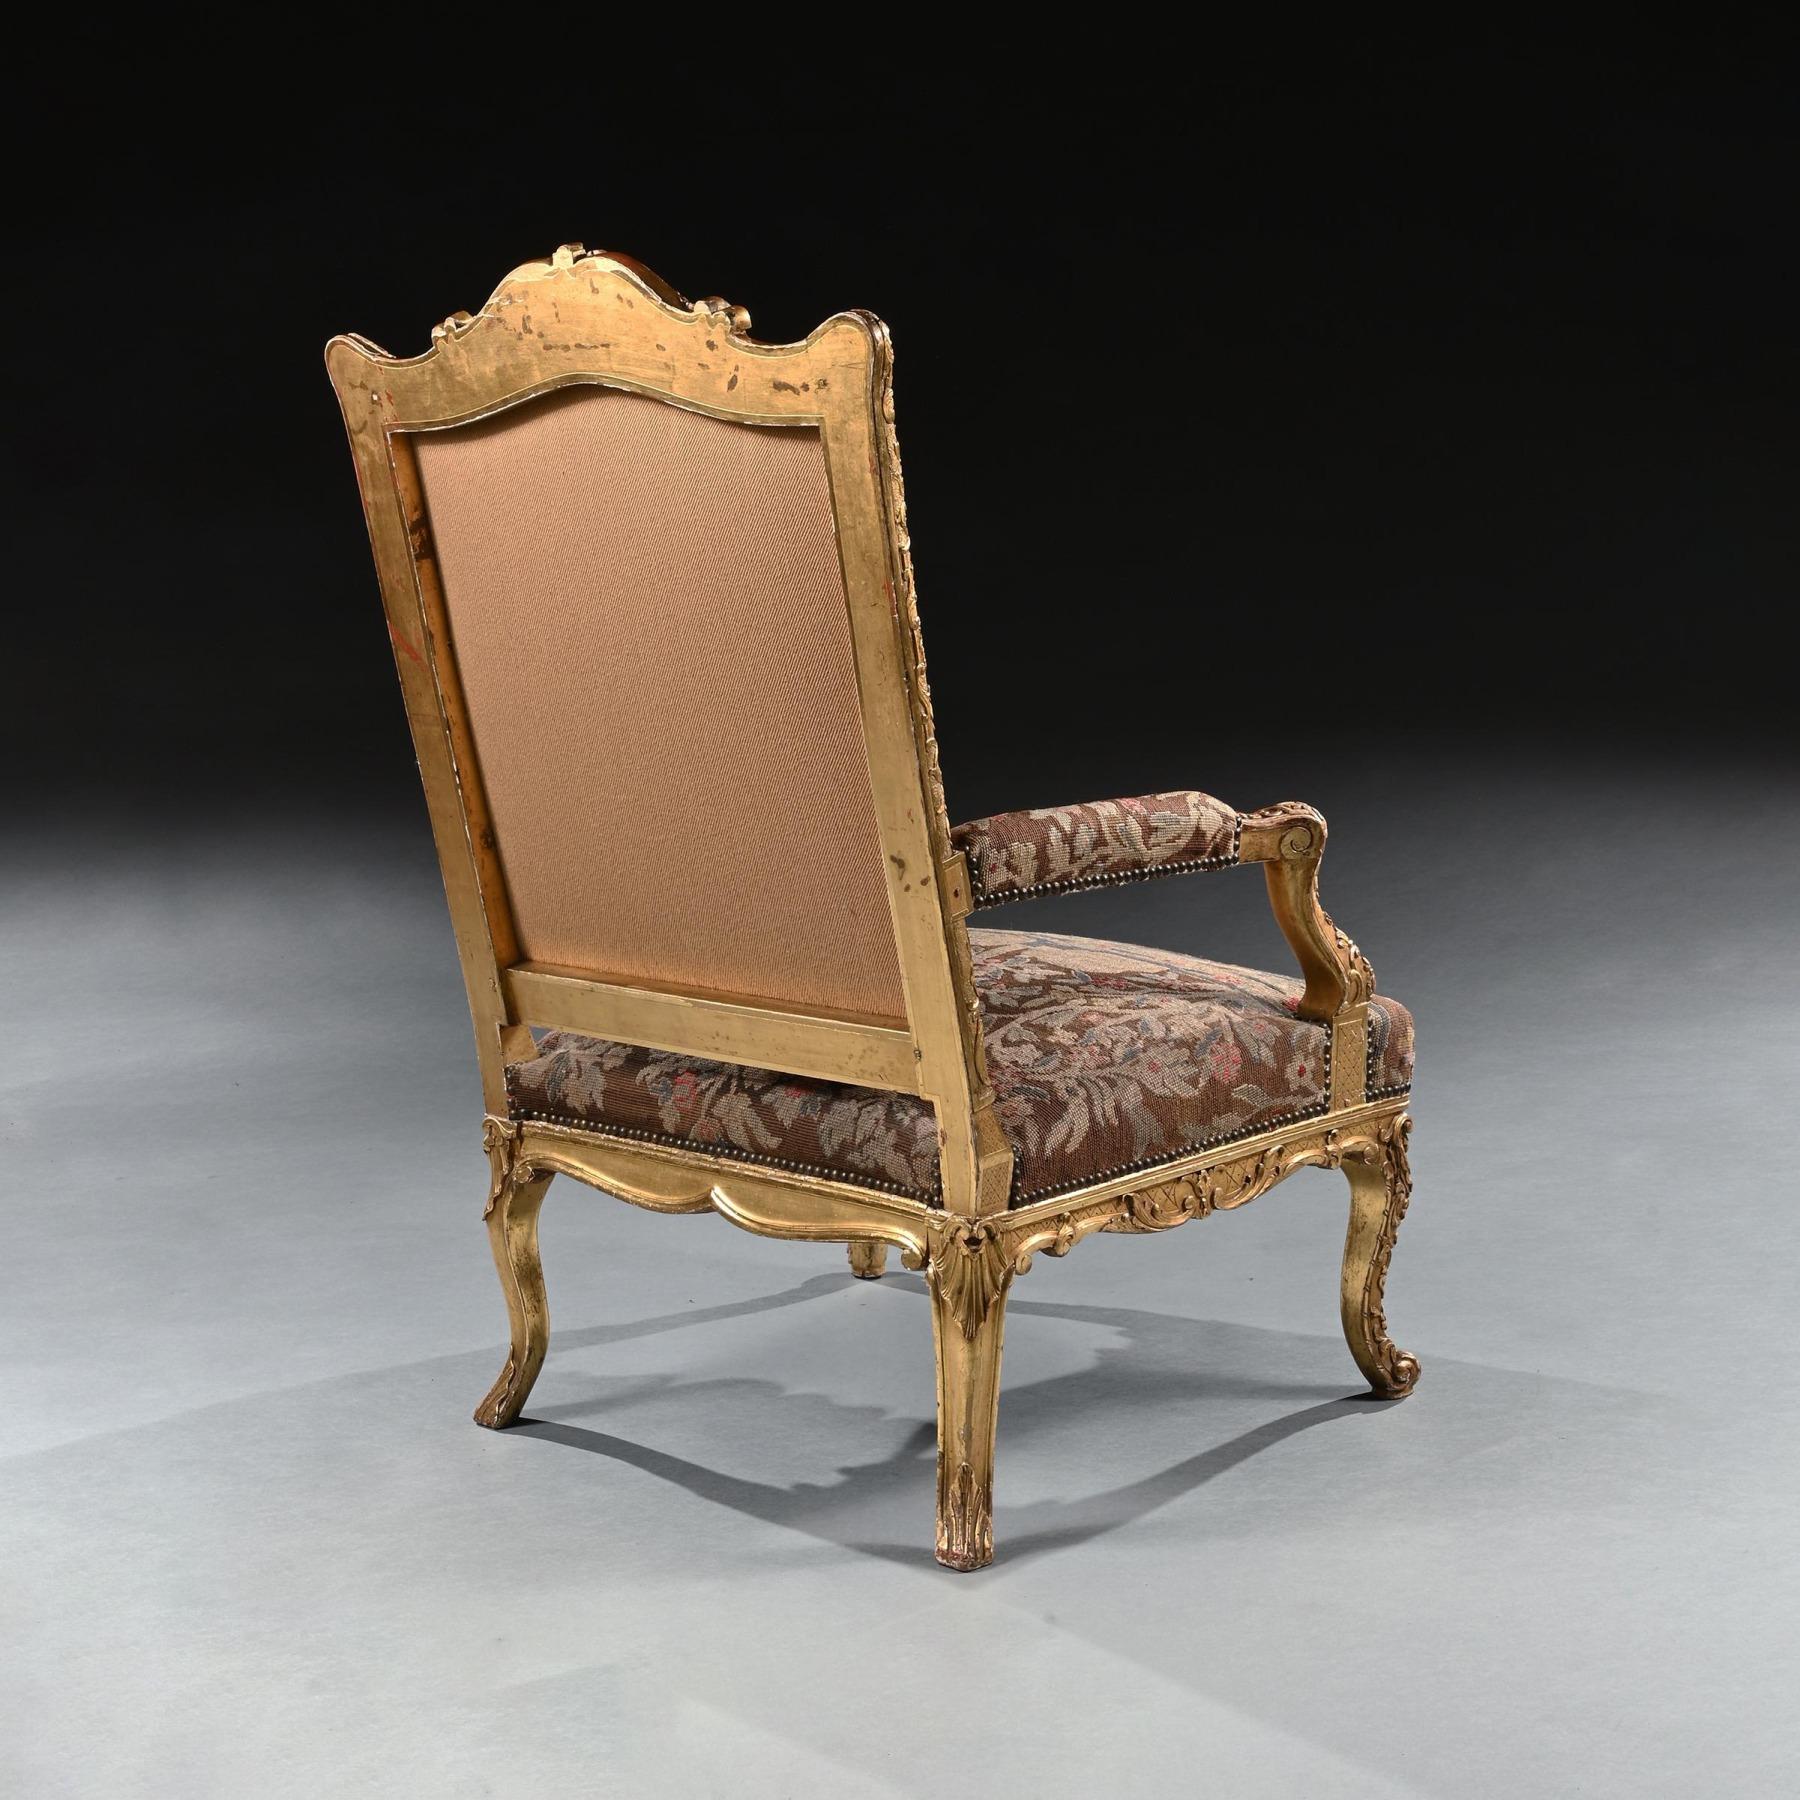 Fine 18th Century French Regence Period Giltwood Armchair Fauteuil For Sale 2